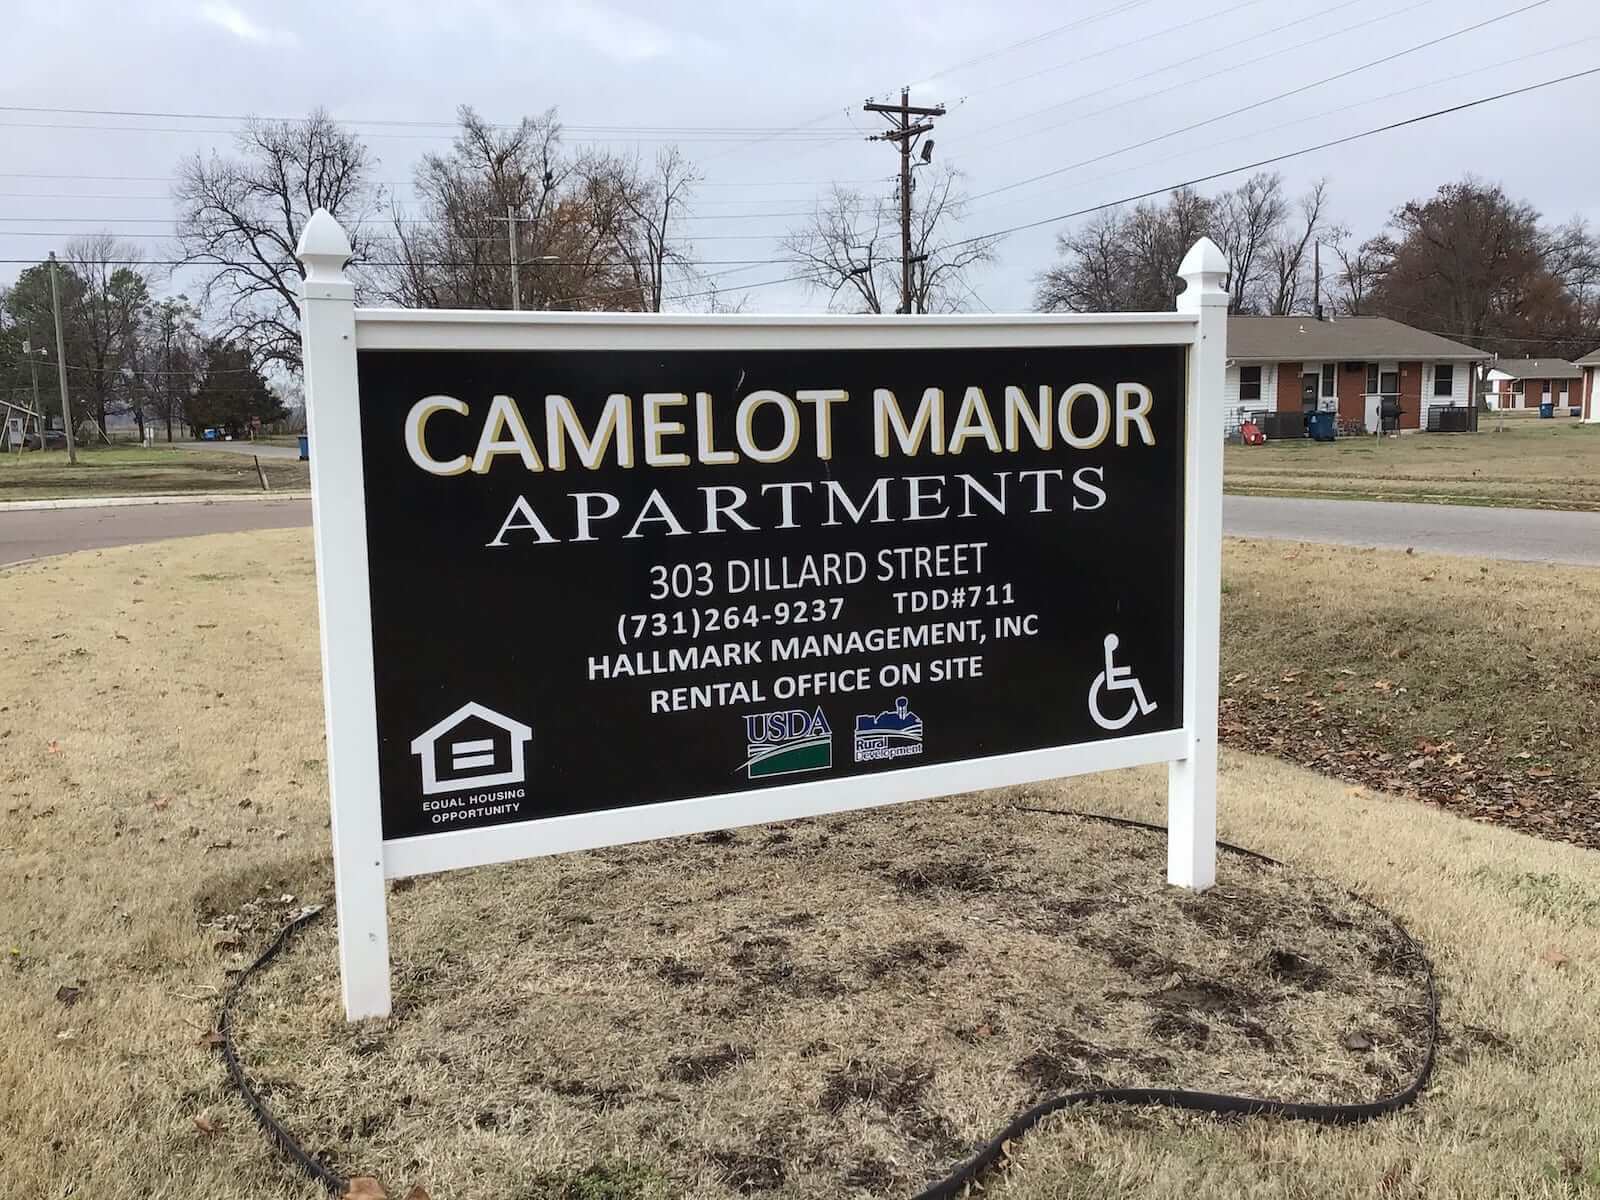 Camelot Manor